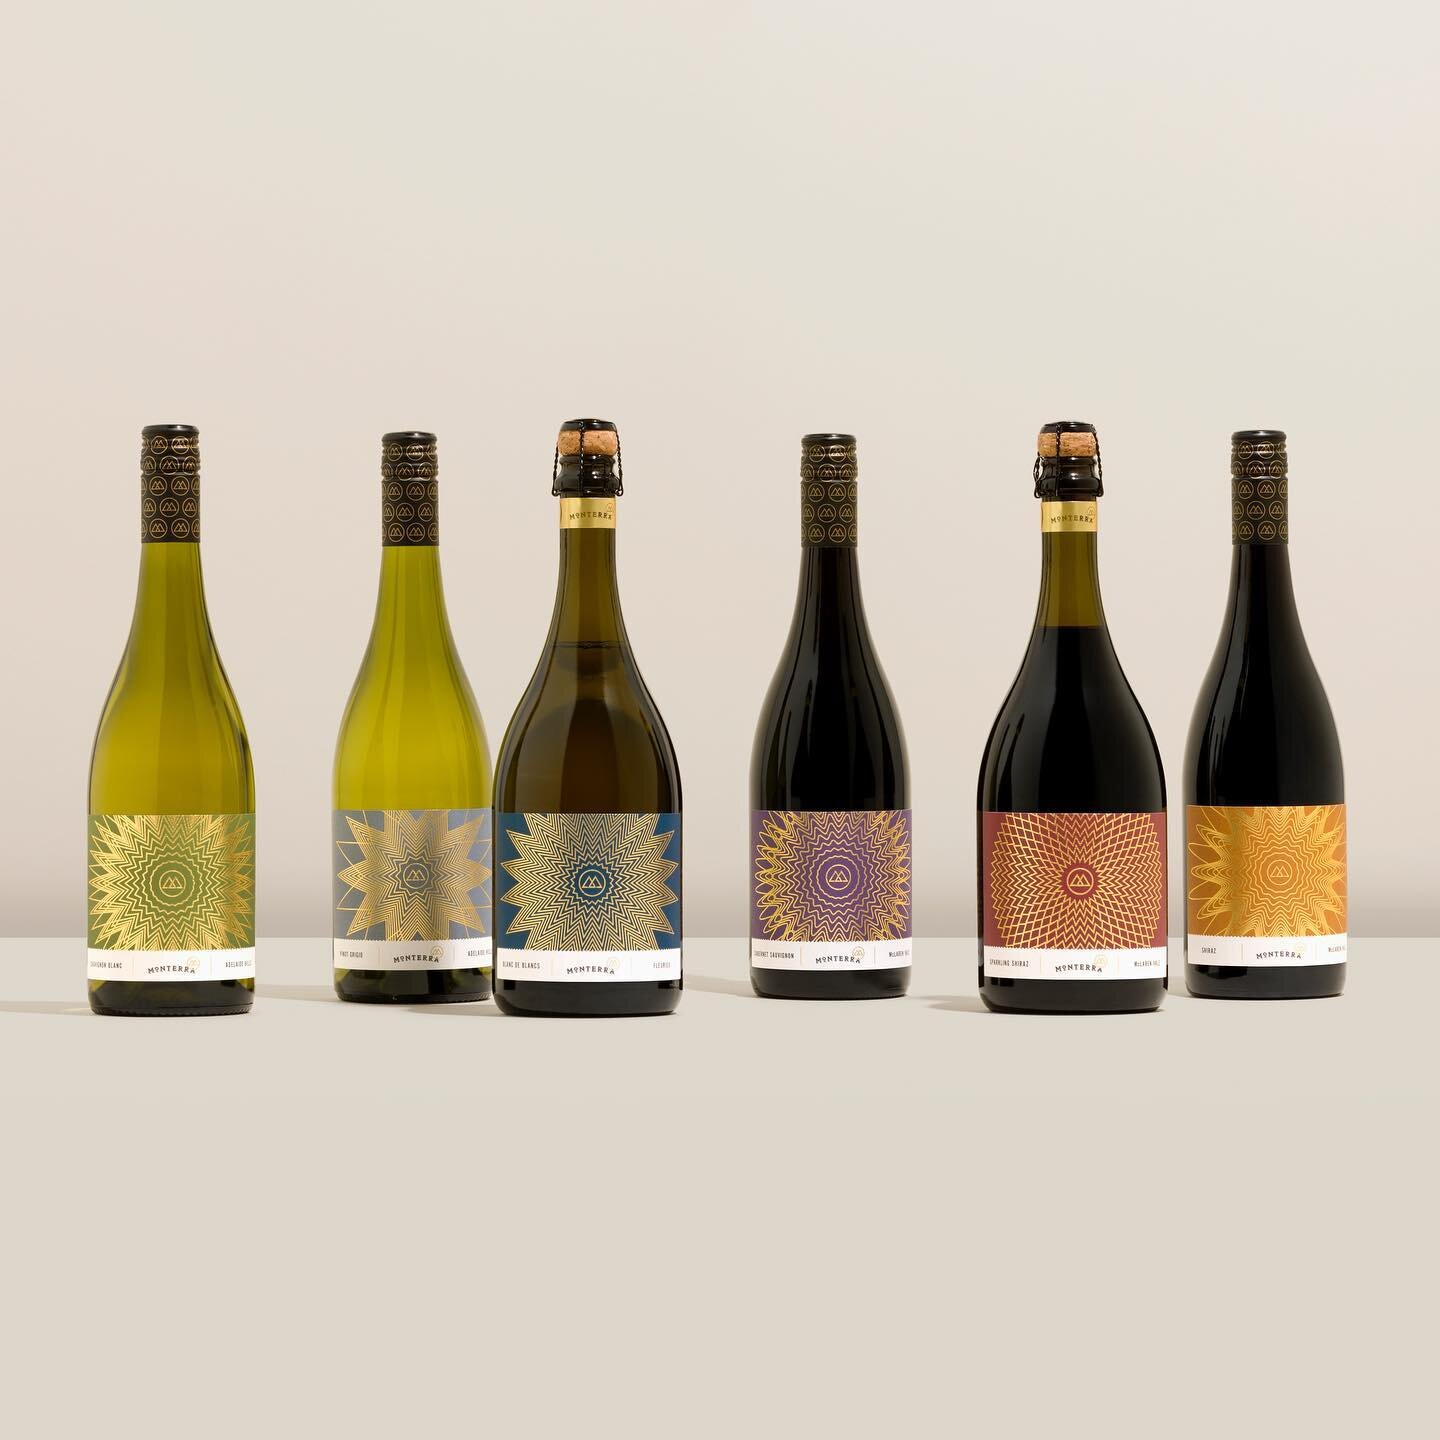 For the last decade, Monterra has created high-end wines born from idyllic vineyards in South Australia. In recent times, the brand has expanded their product offering and steered towards a more sustainable and vegan focus. A review of the core range